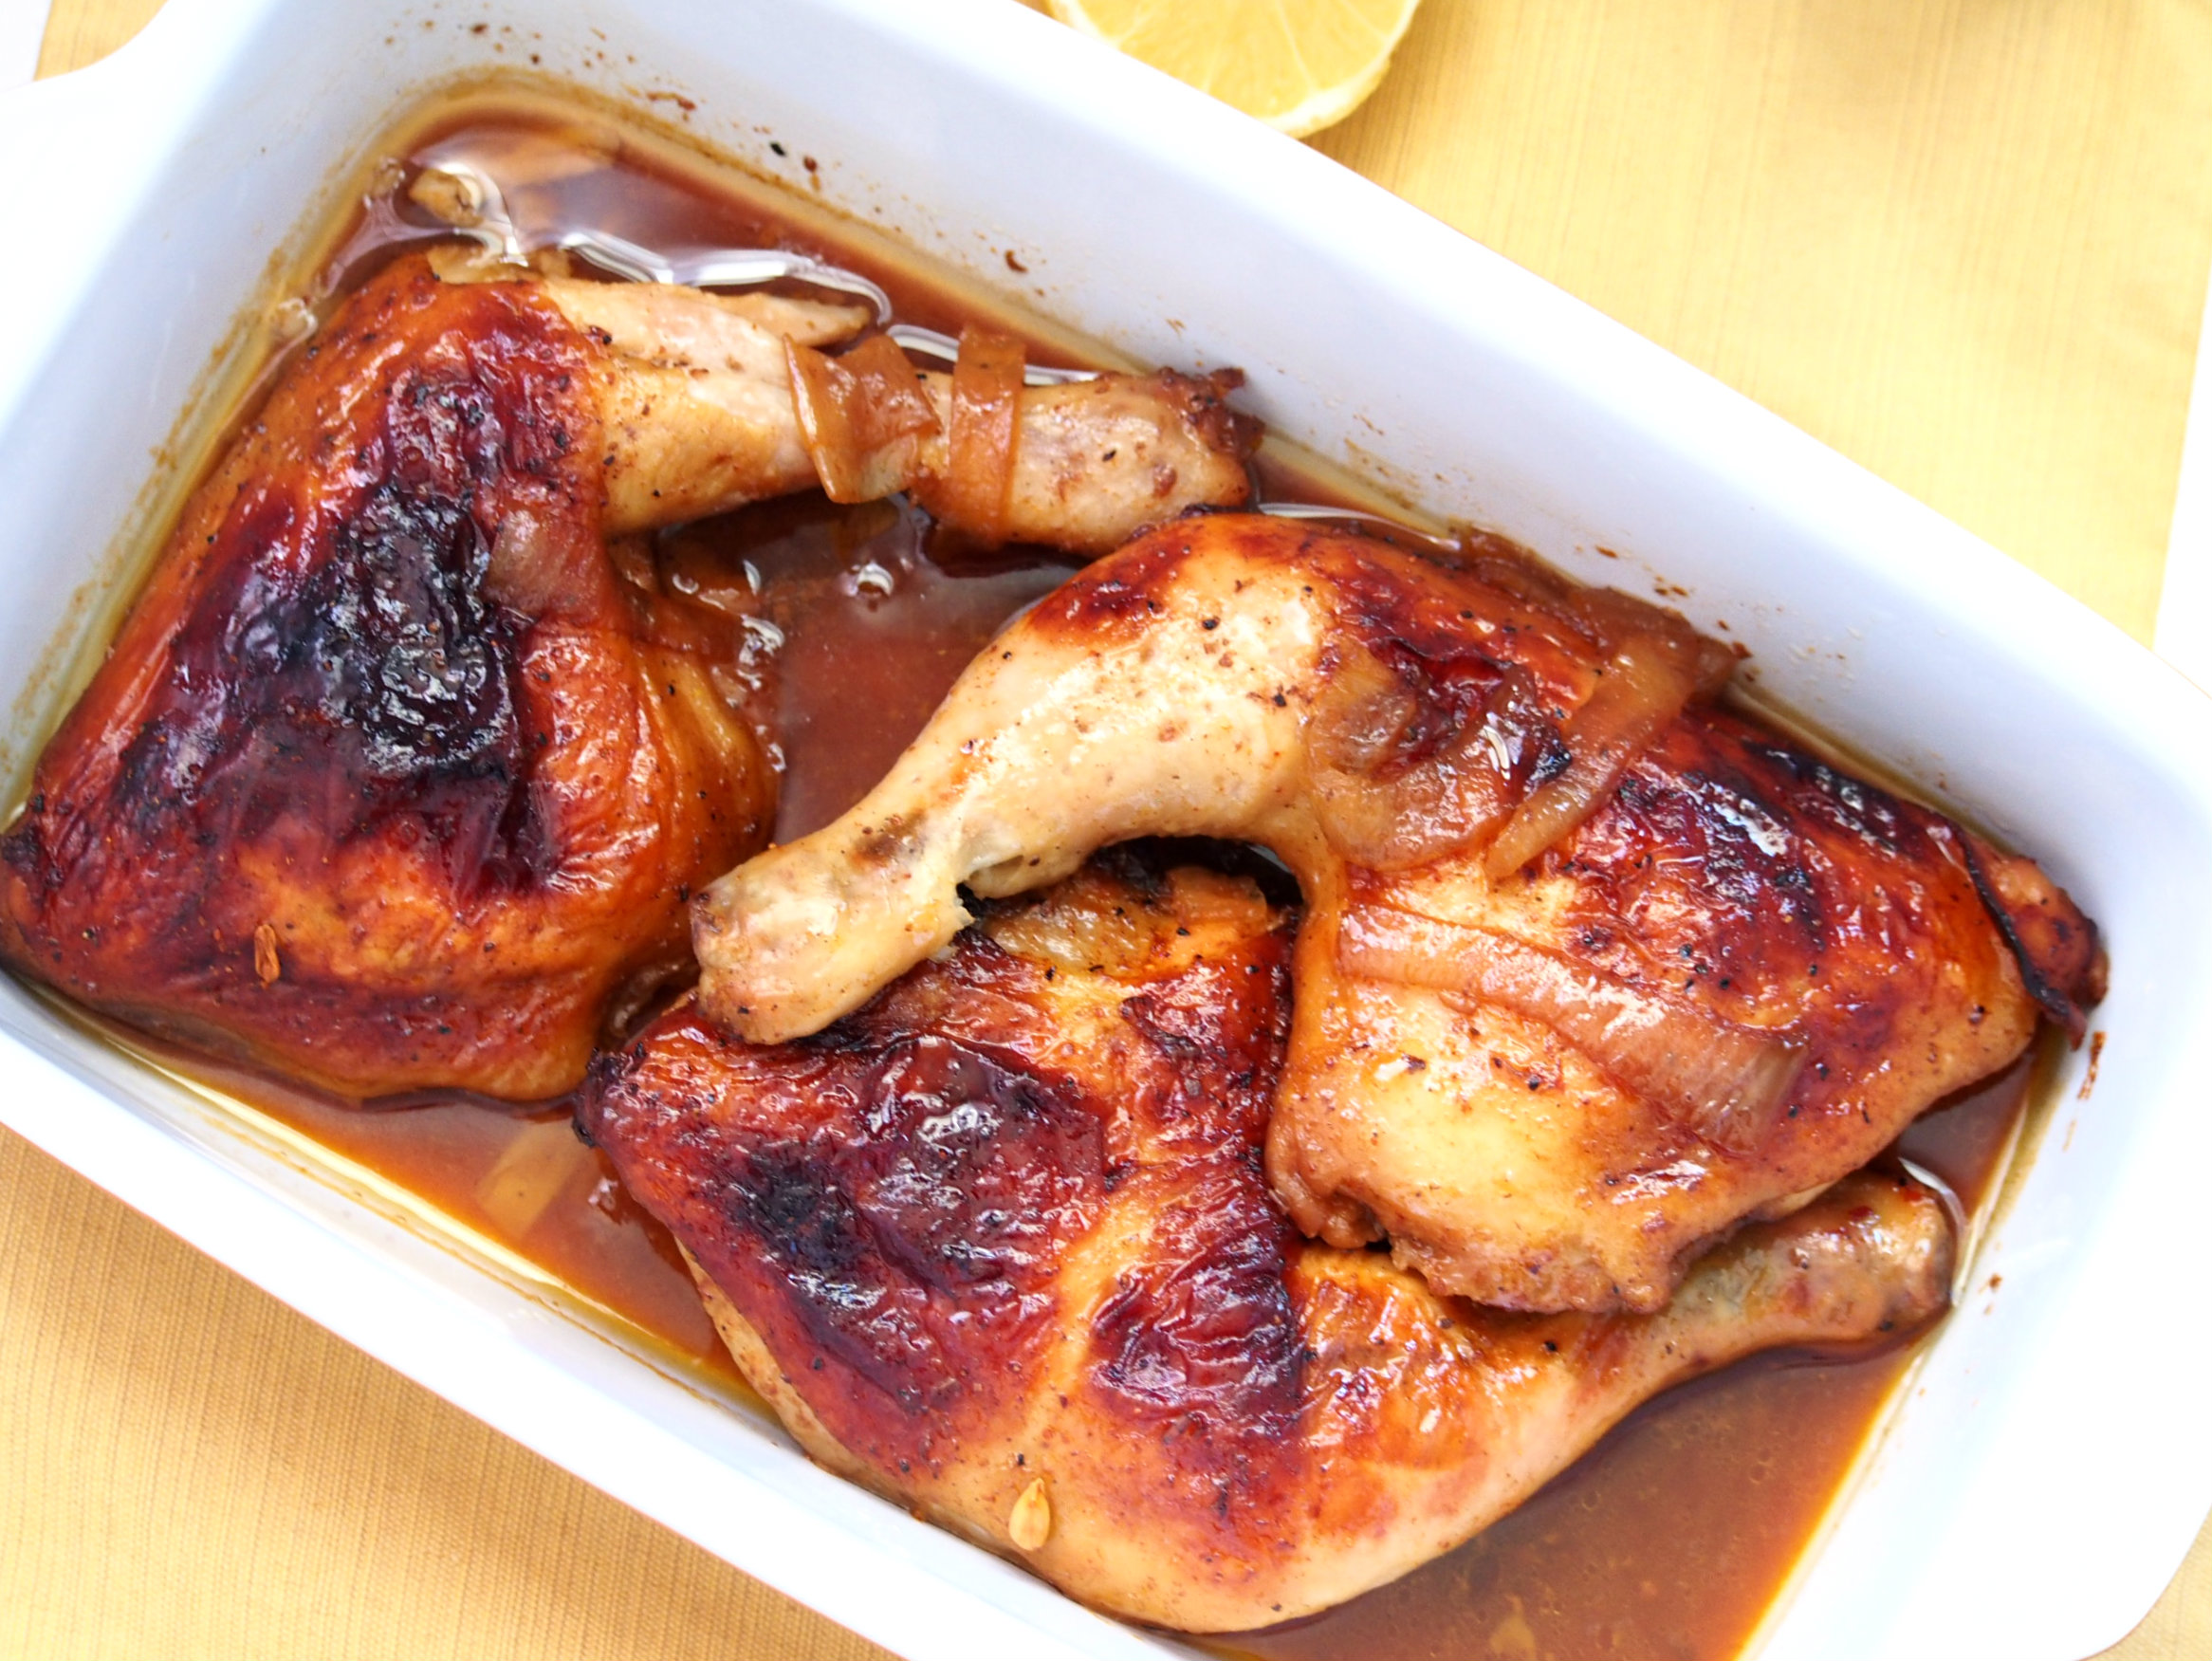 Juicy Chicken pieces with delicious, flavorful sauce, this Five Ingredient Lemon BBQ Chicken is your new go-to dinner recipe on a weekday.